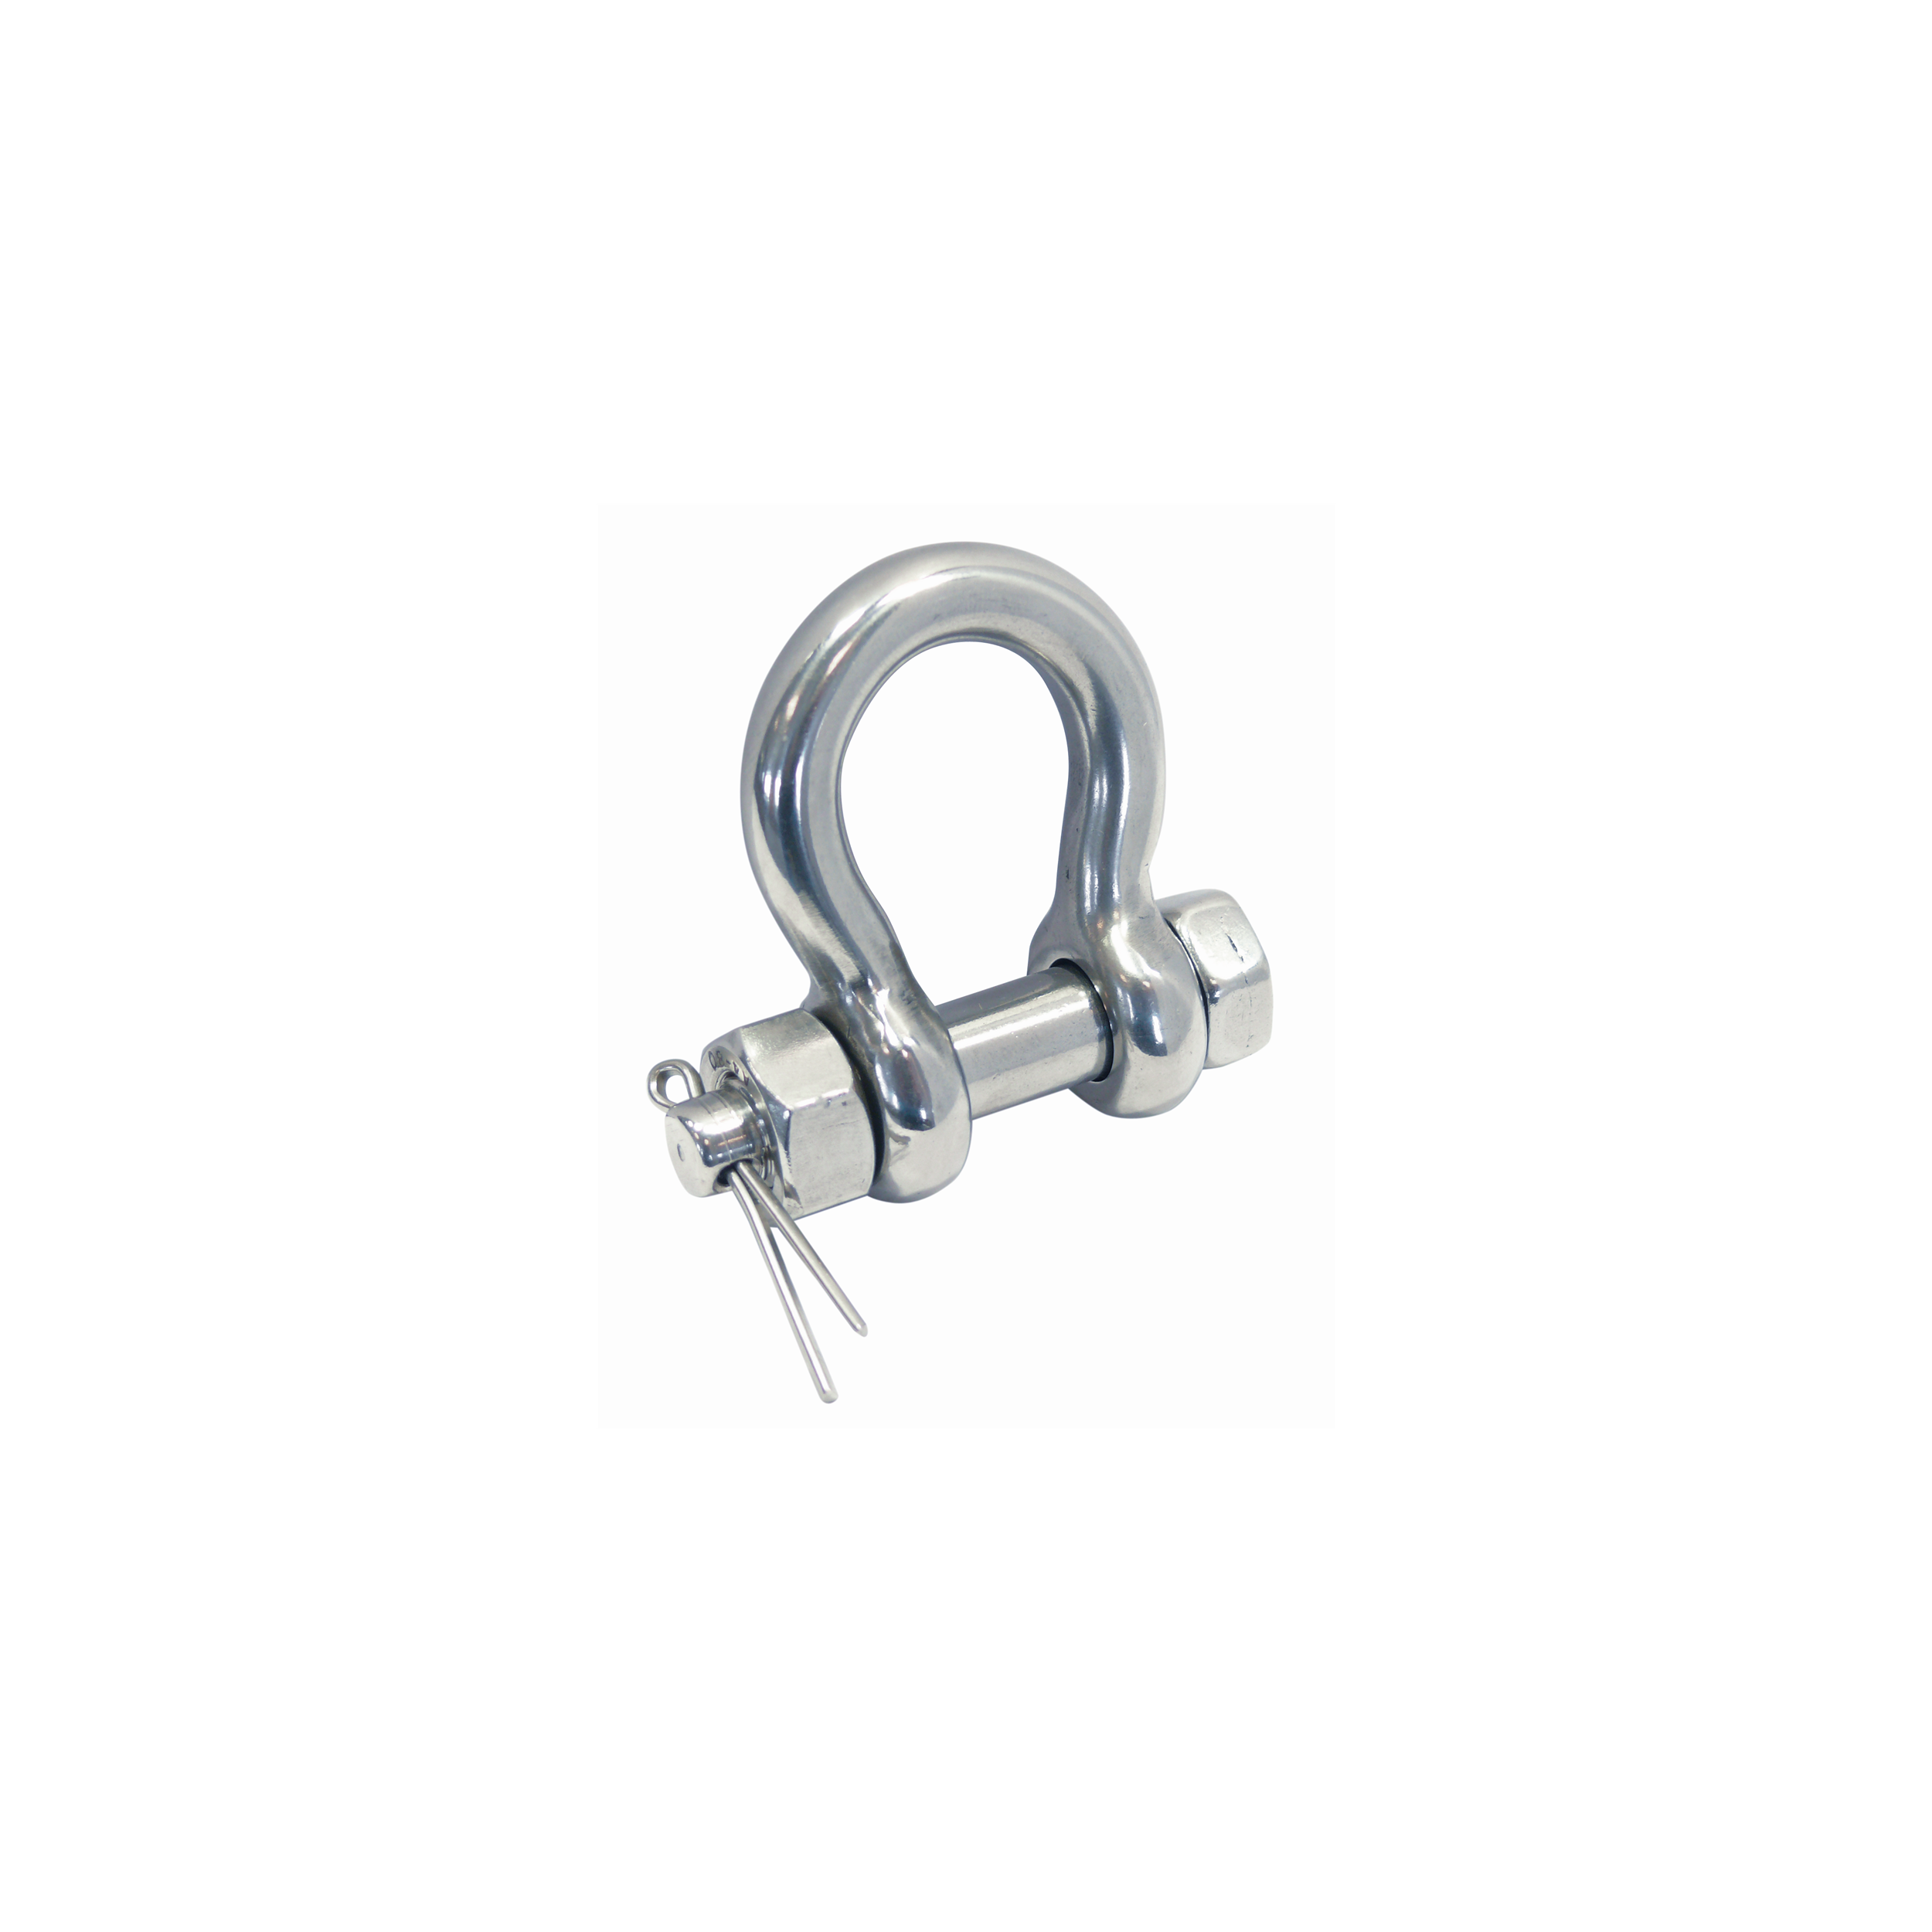 Bow shackle with secure bolt A4  bolt 19mm, bow 16mm